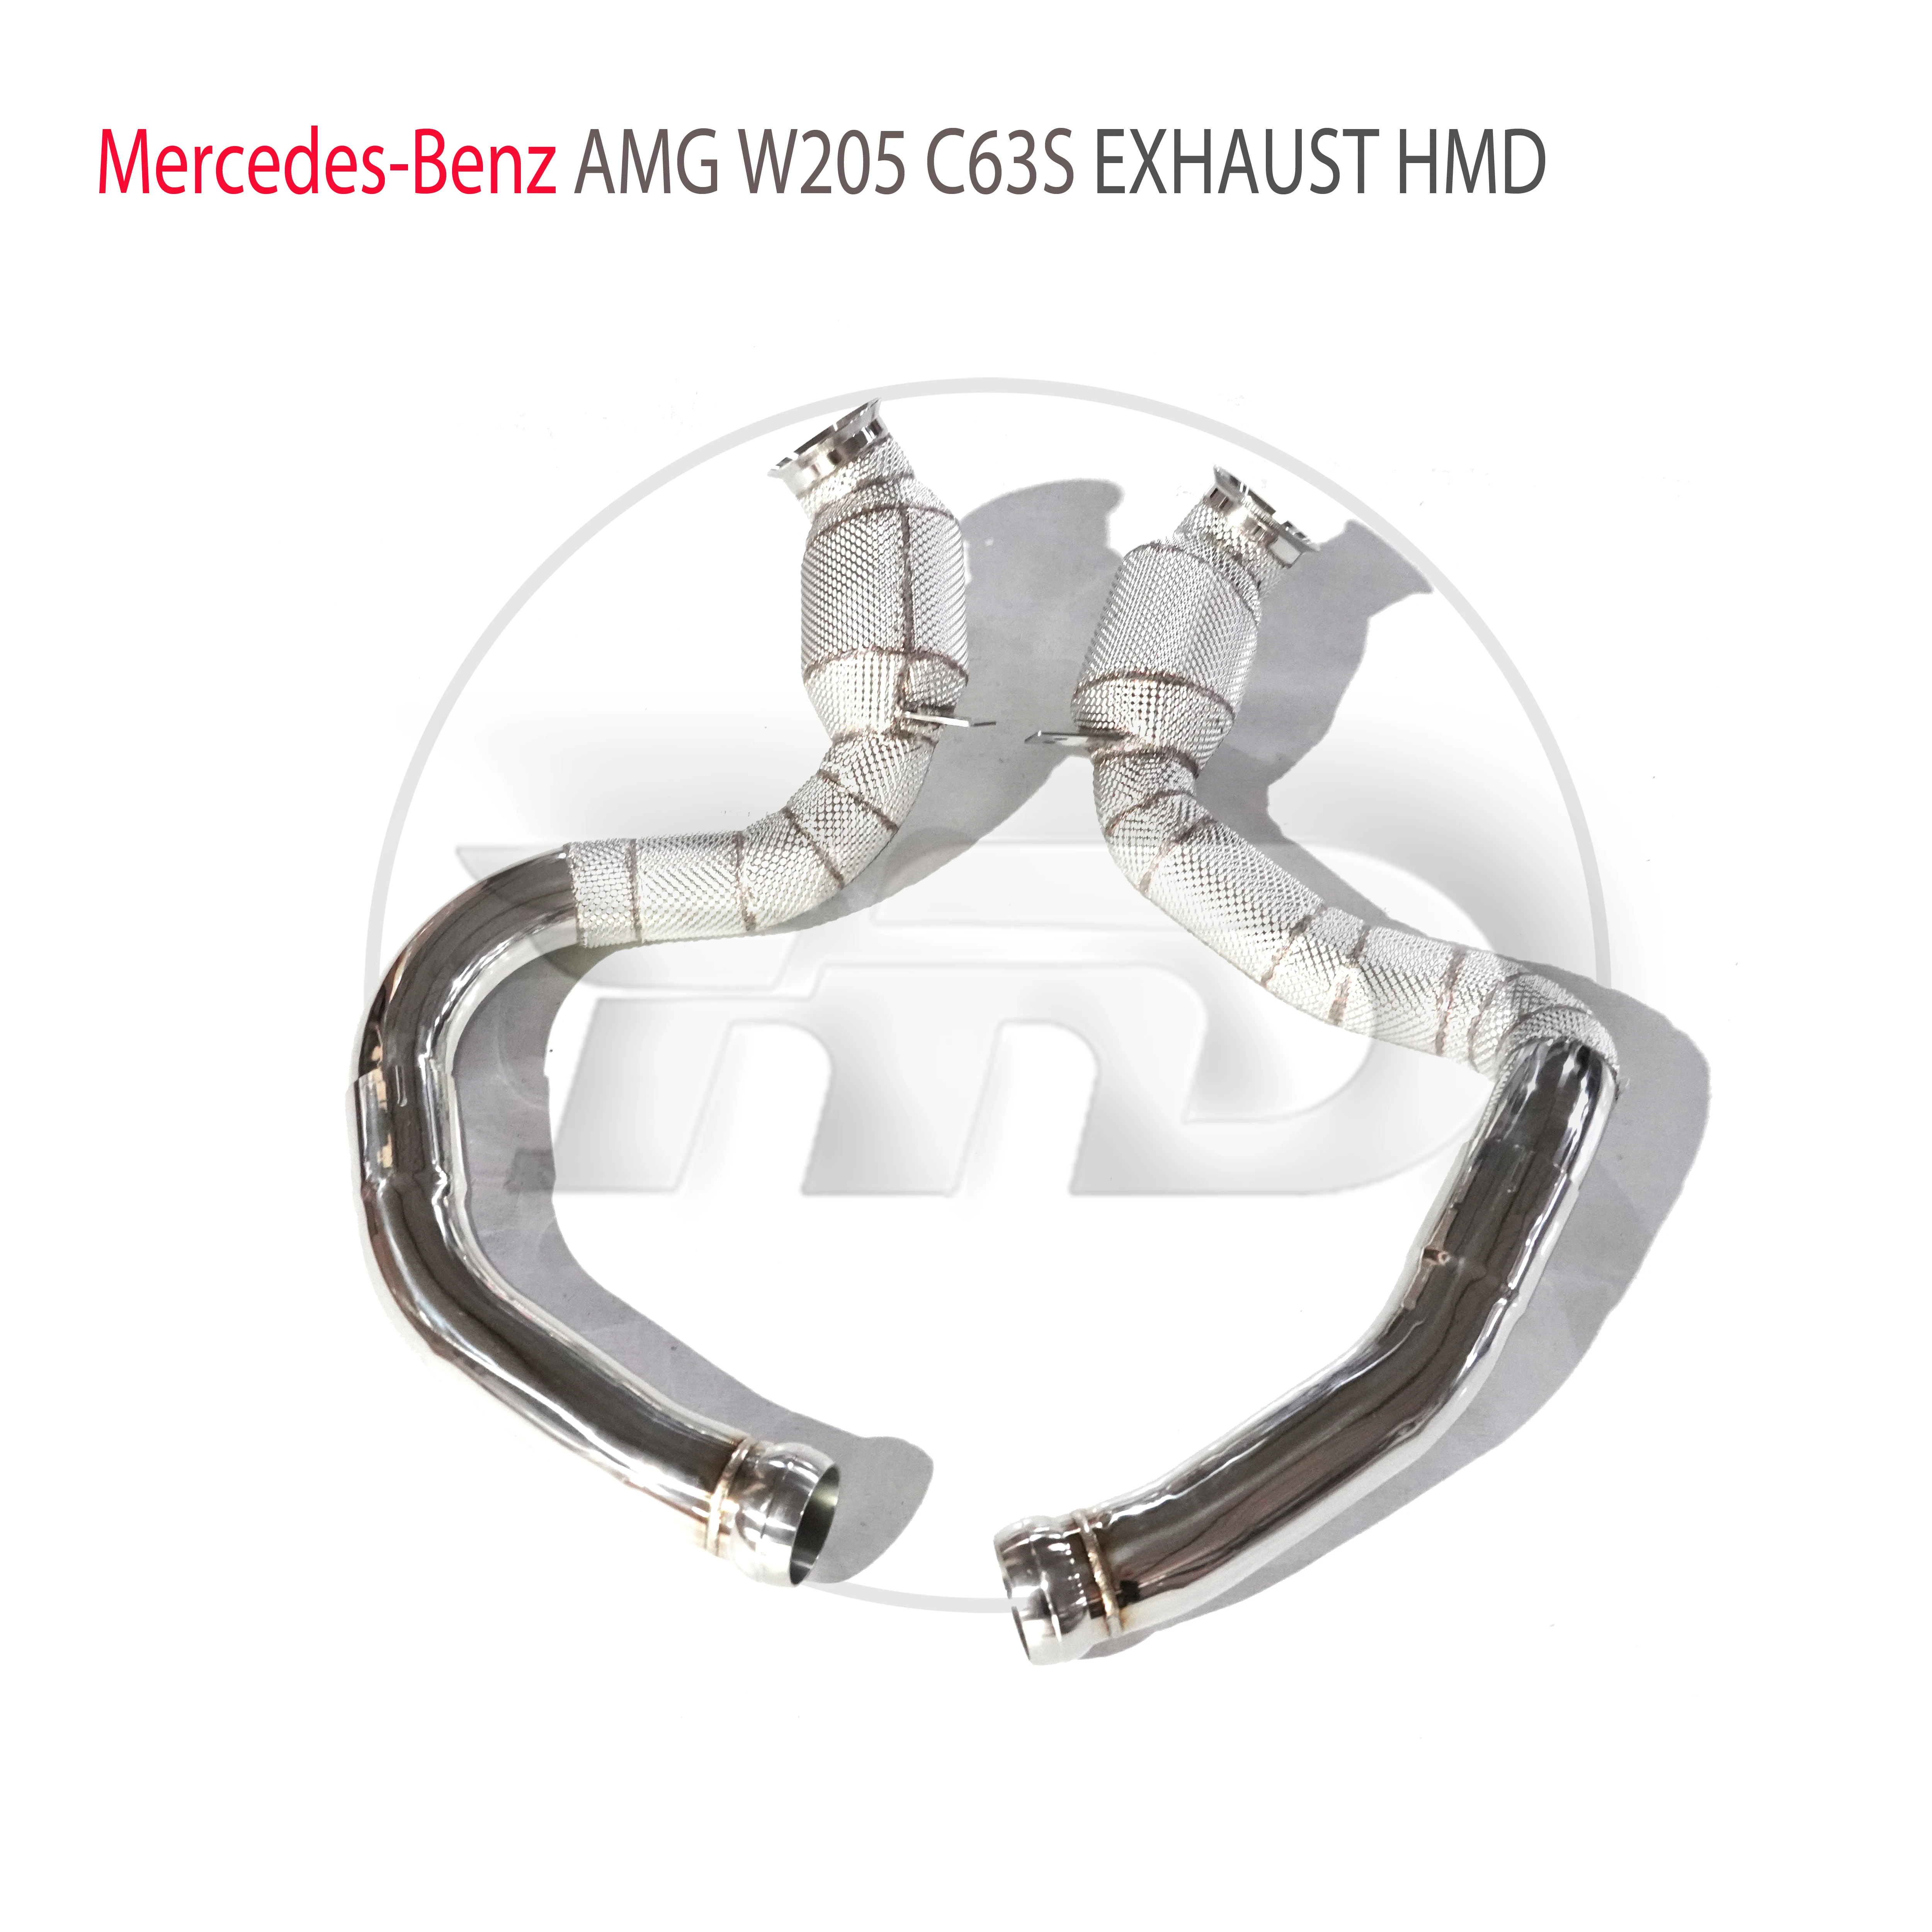 

HMD Car Accessories Exhaust System High Flow Performance Downpipe for Mercedes Benz AMG W205 C63S With Catalytic Converter